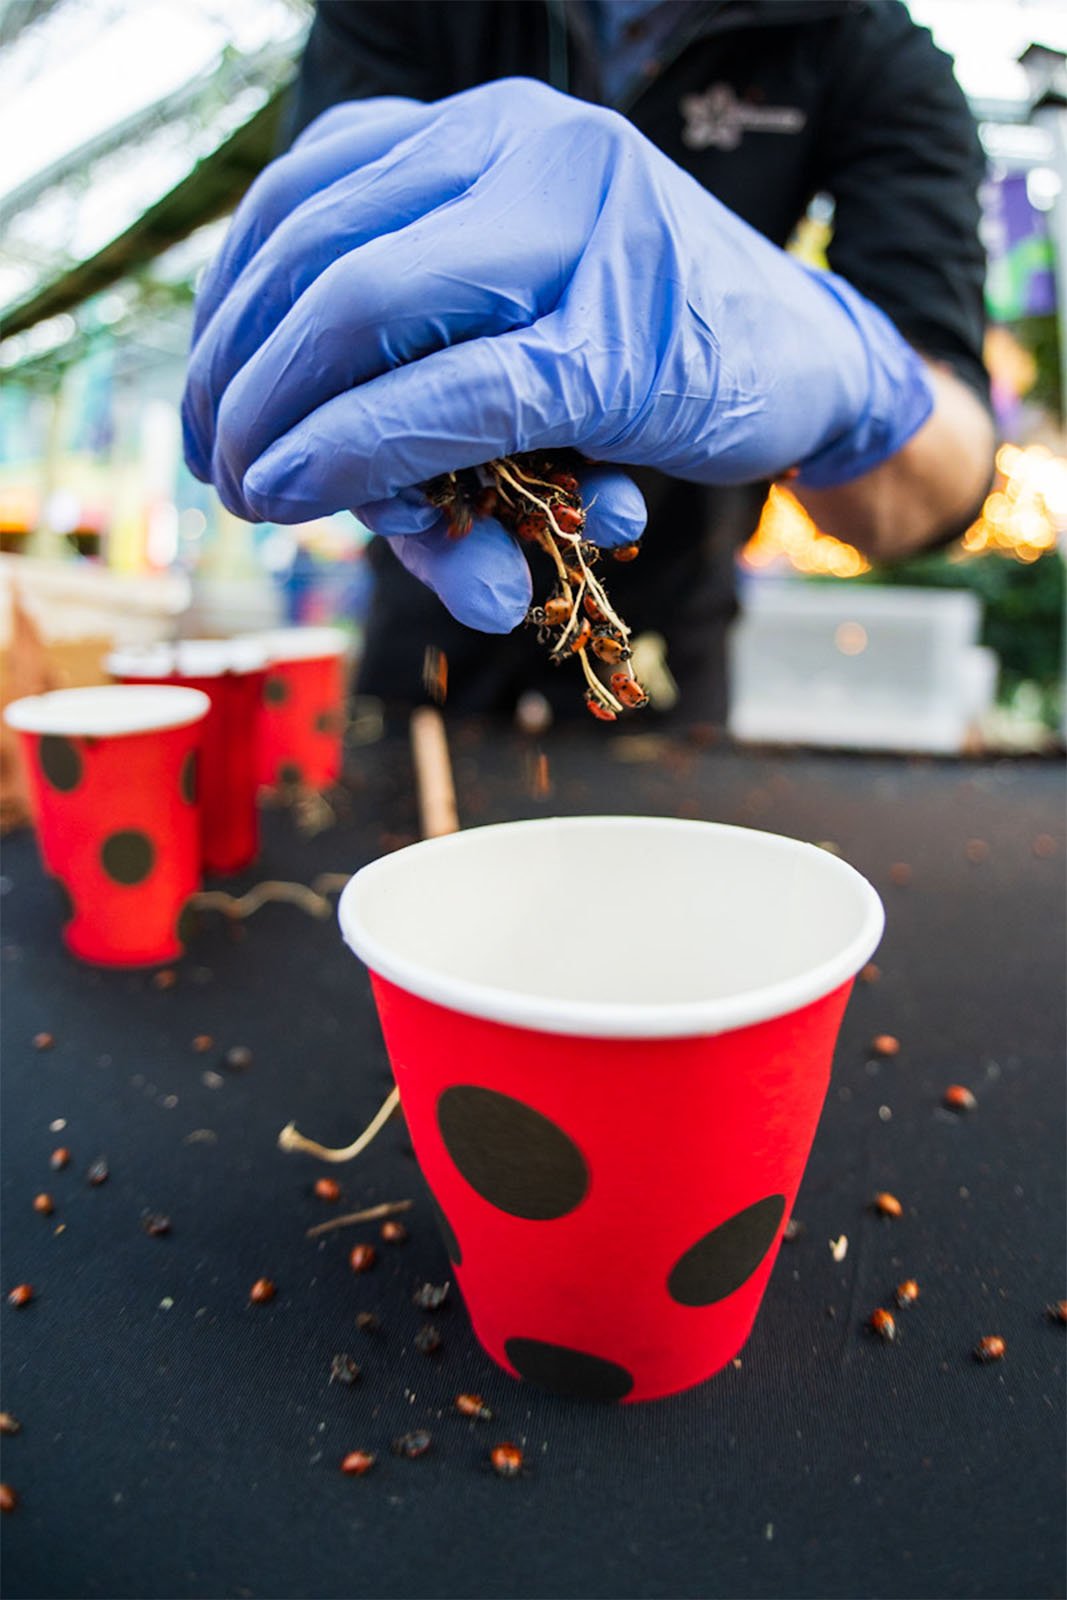 A person wearing a blue glove sprinkles cloves into a red cup adorned with black polka dots, standing at an outdoor table with more cups and cloves visible.